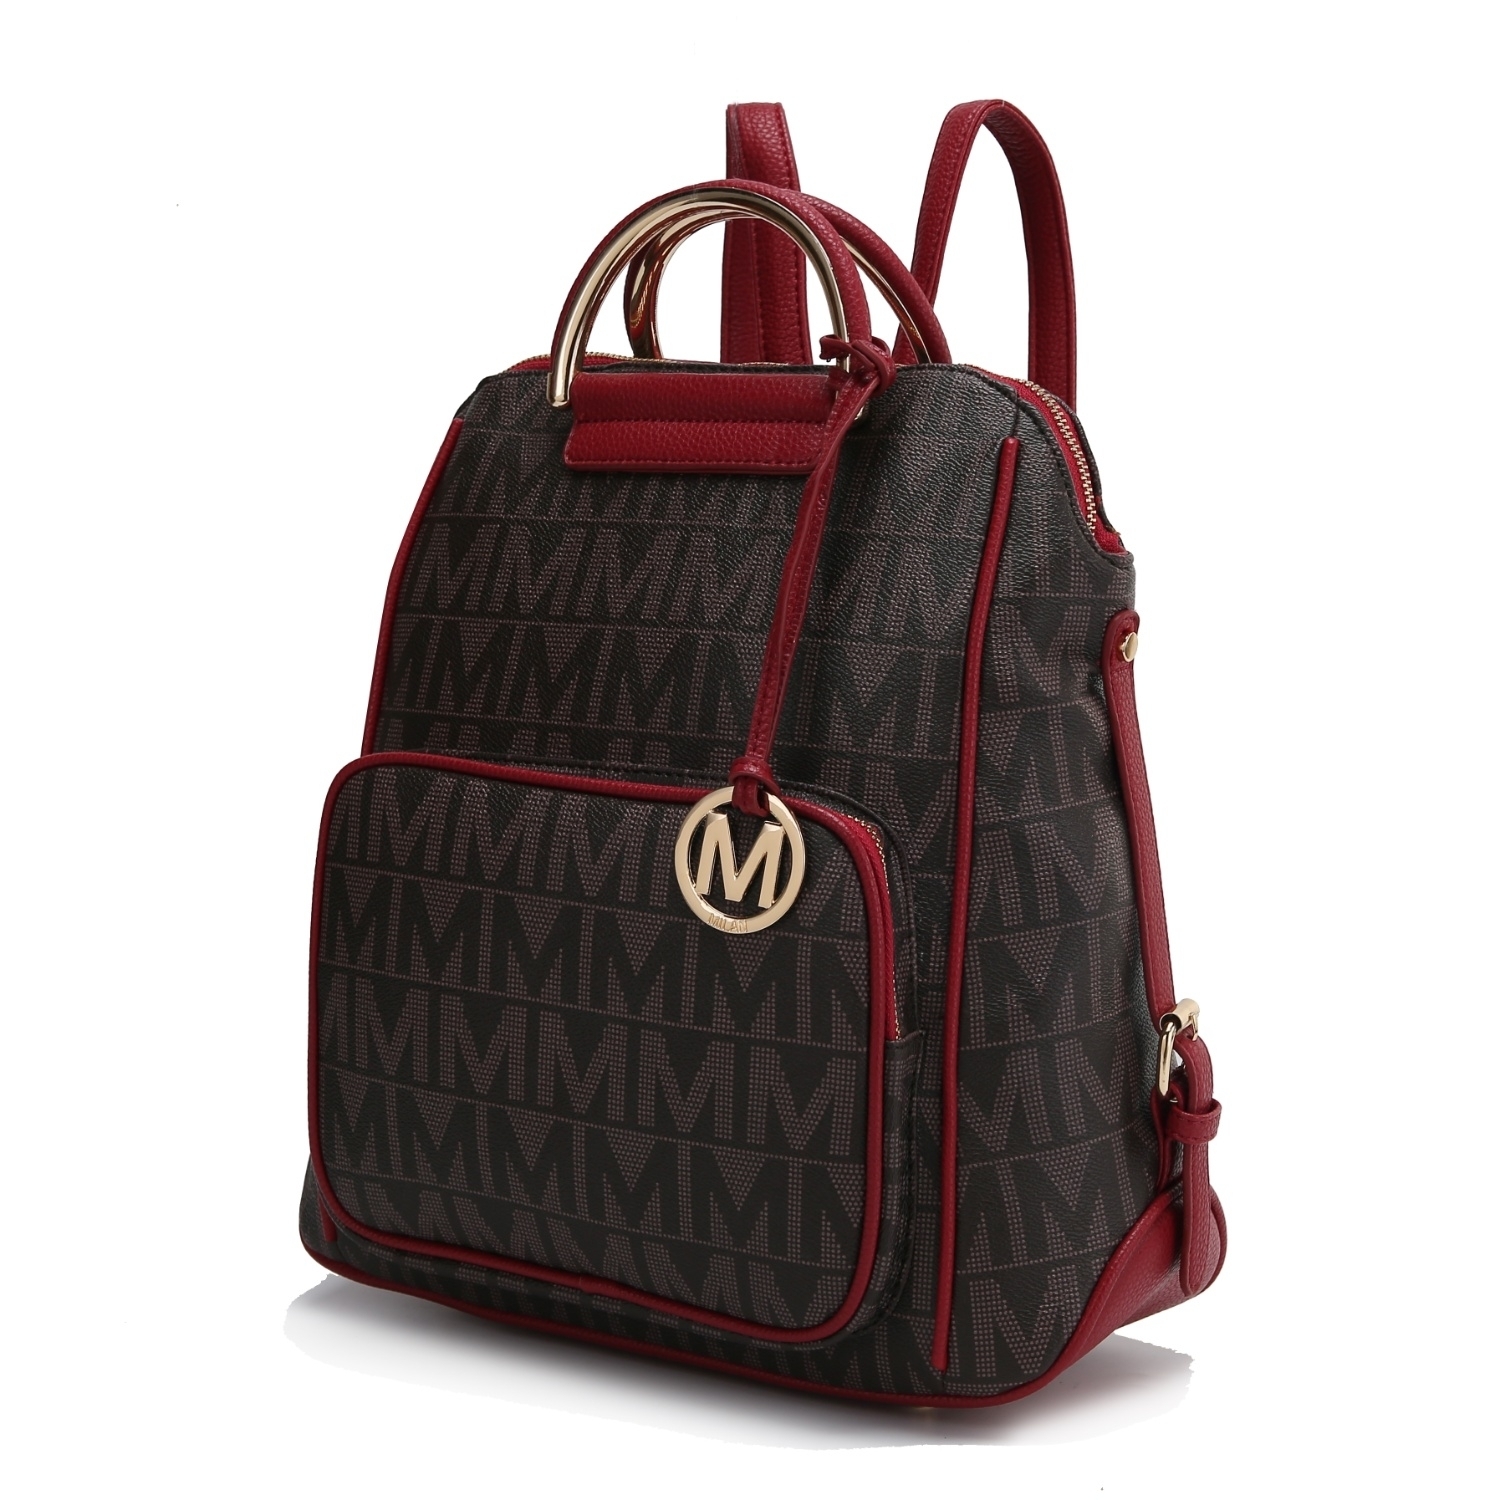 MKF Collection Cora Milan M Signature Trendy Backpack By Mia K. - Red